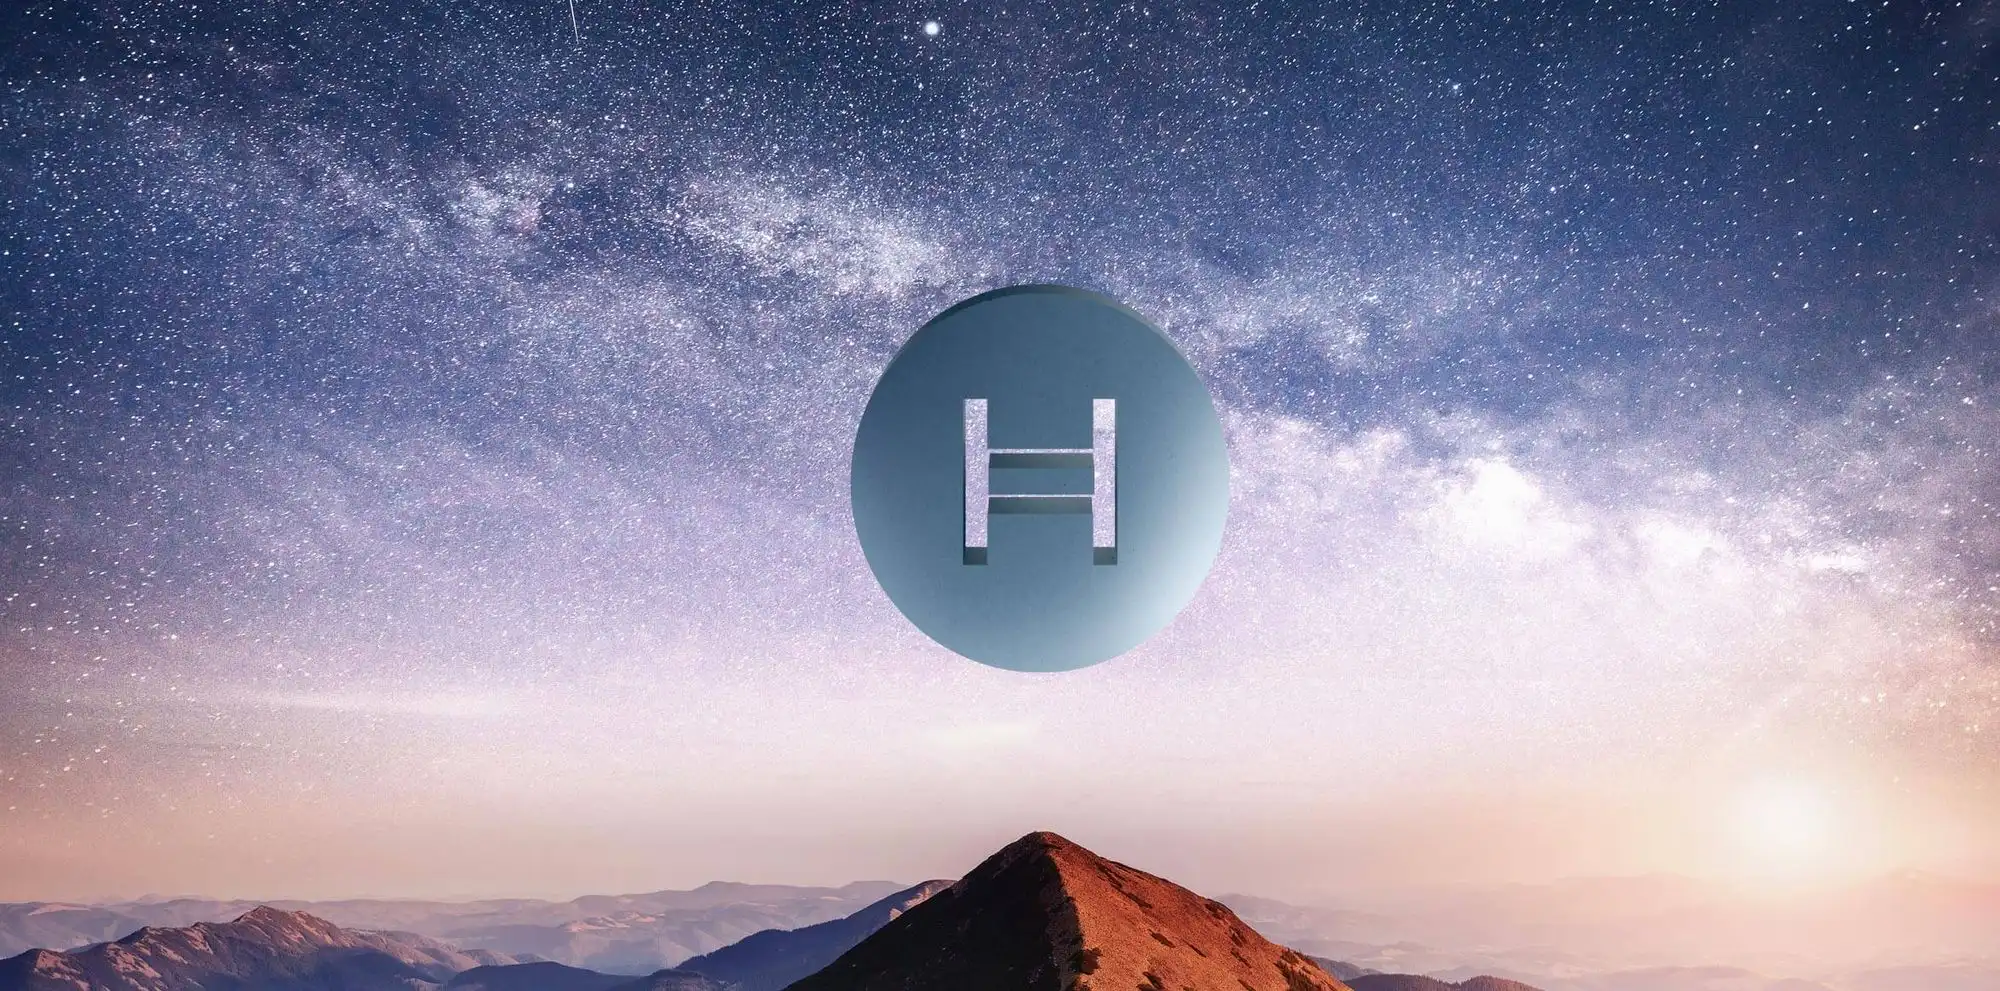 Hedera coin HBAR price jumps 20% after FedNow mentions Dropp - but there's a catch